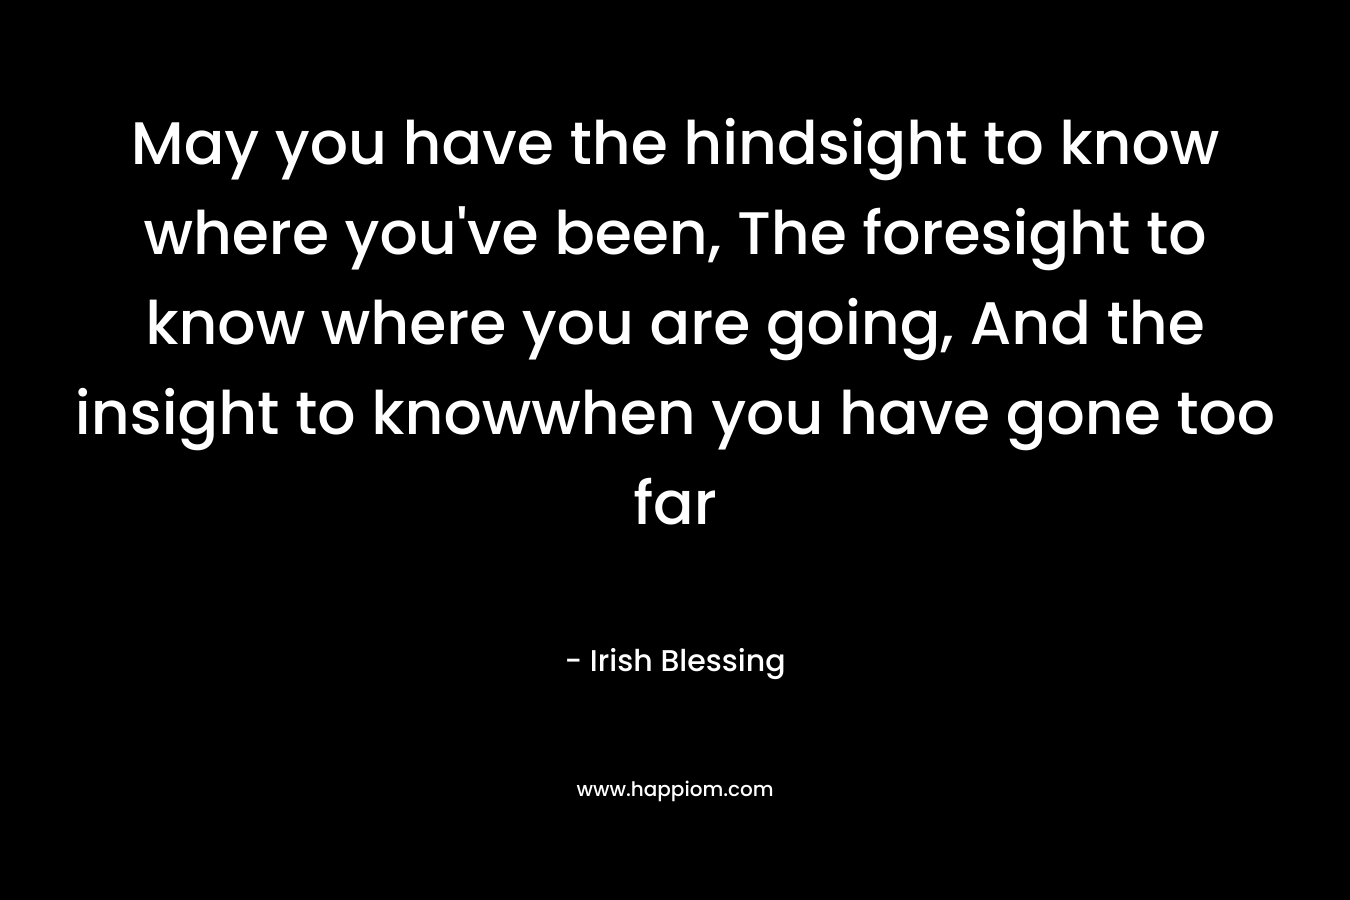 May you have the hindsight to know where you've been, The foresight to know where you are going, And the insight to knowwhen you have gone too far